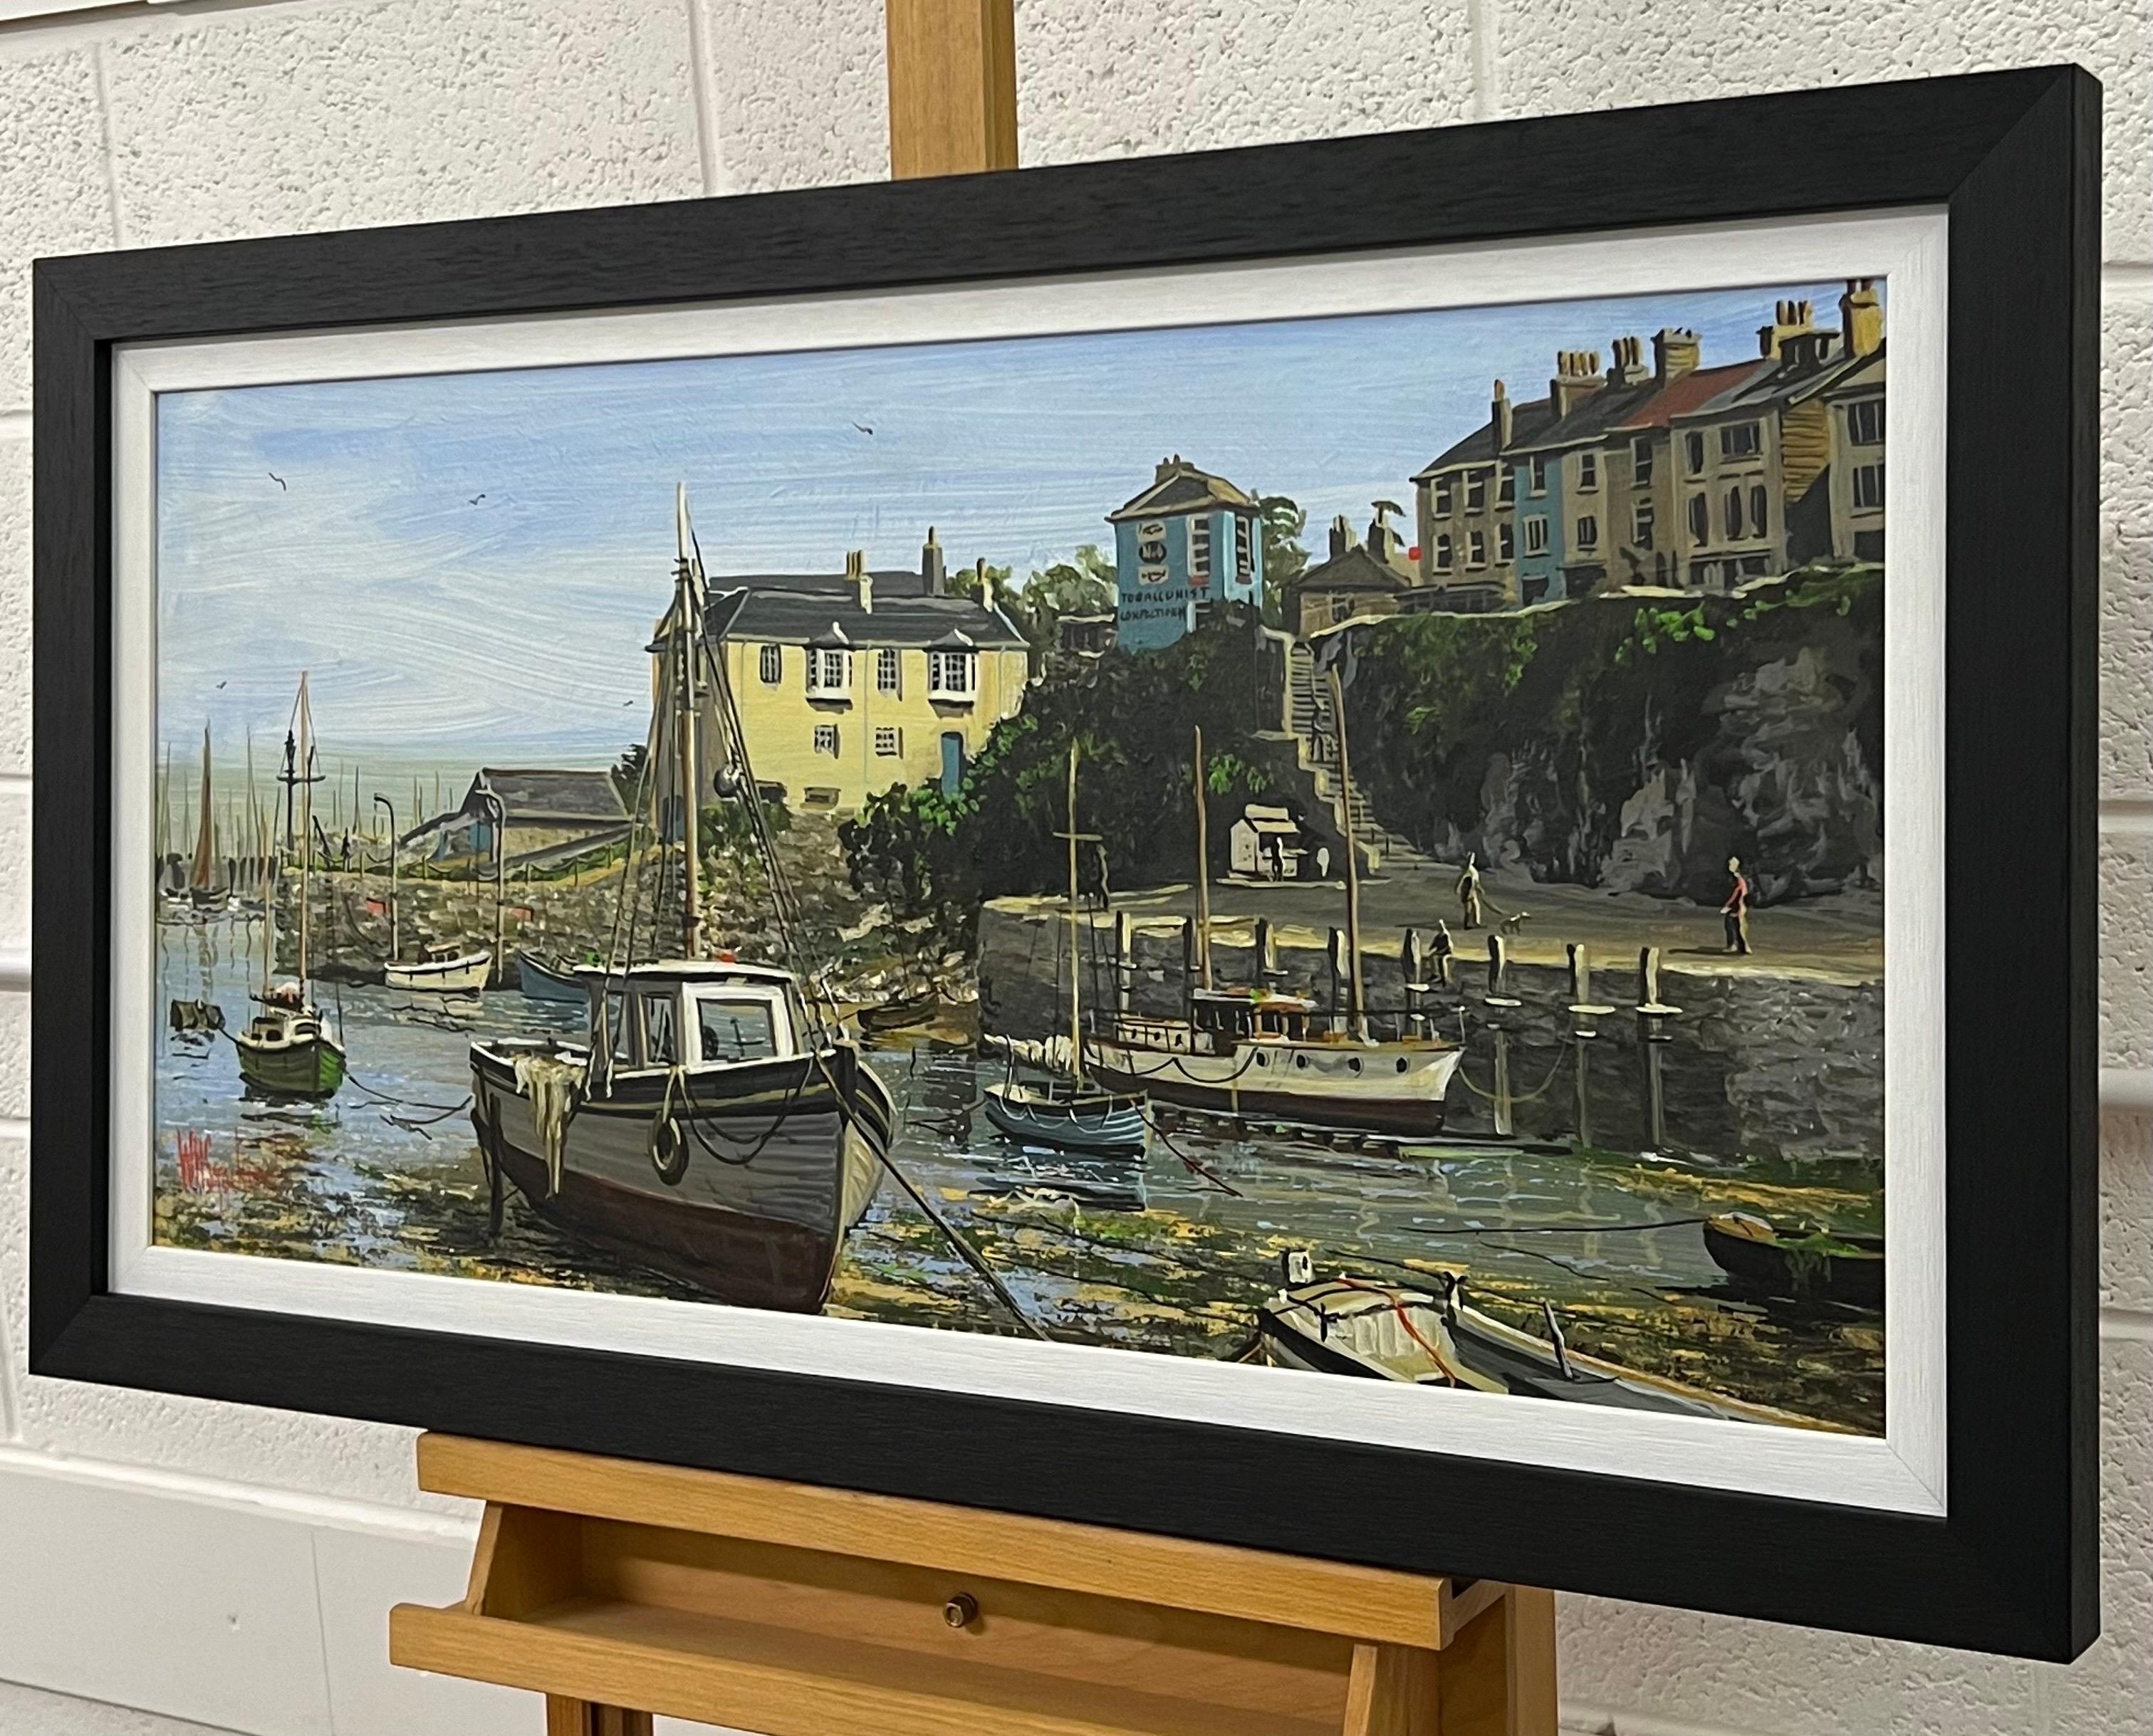 Vintage 1970's Harbour Scene with Moored Boats & Figures by British Artist, William Stockman (1935-2021) 

Art measures 31 x 15 inches 
Frame measures 36 x 20 inches 

Professionally cleaned and re-framed in a high quality contemporary black